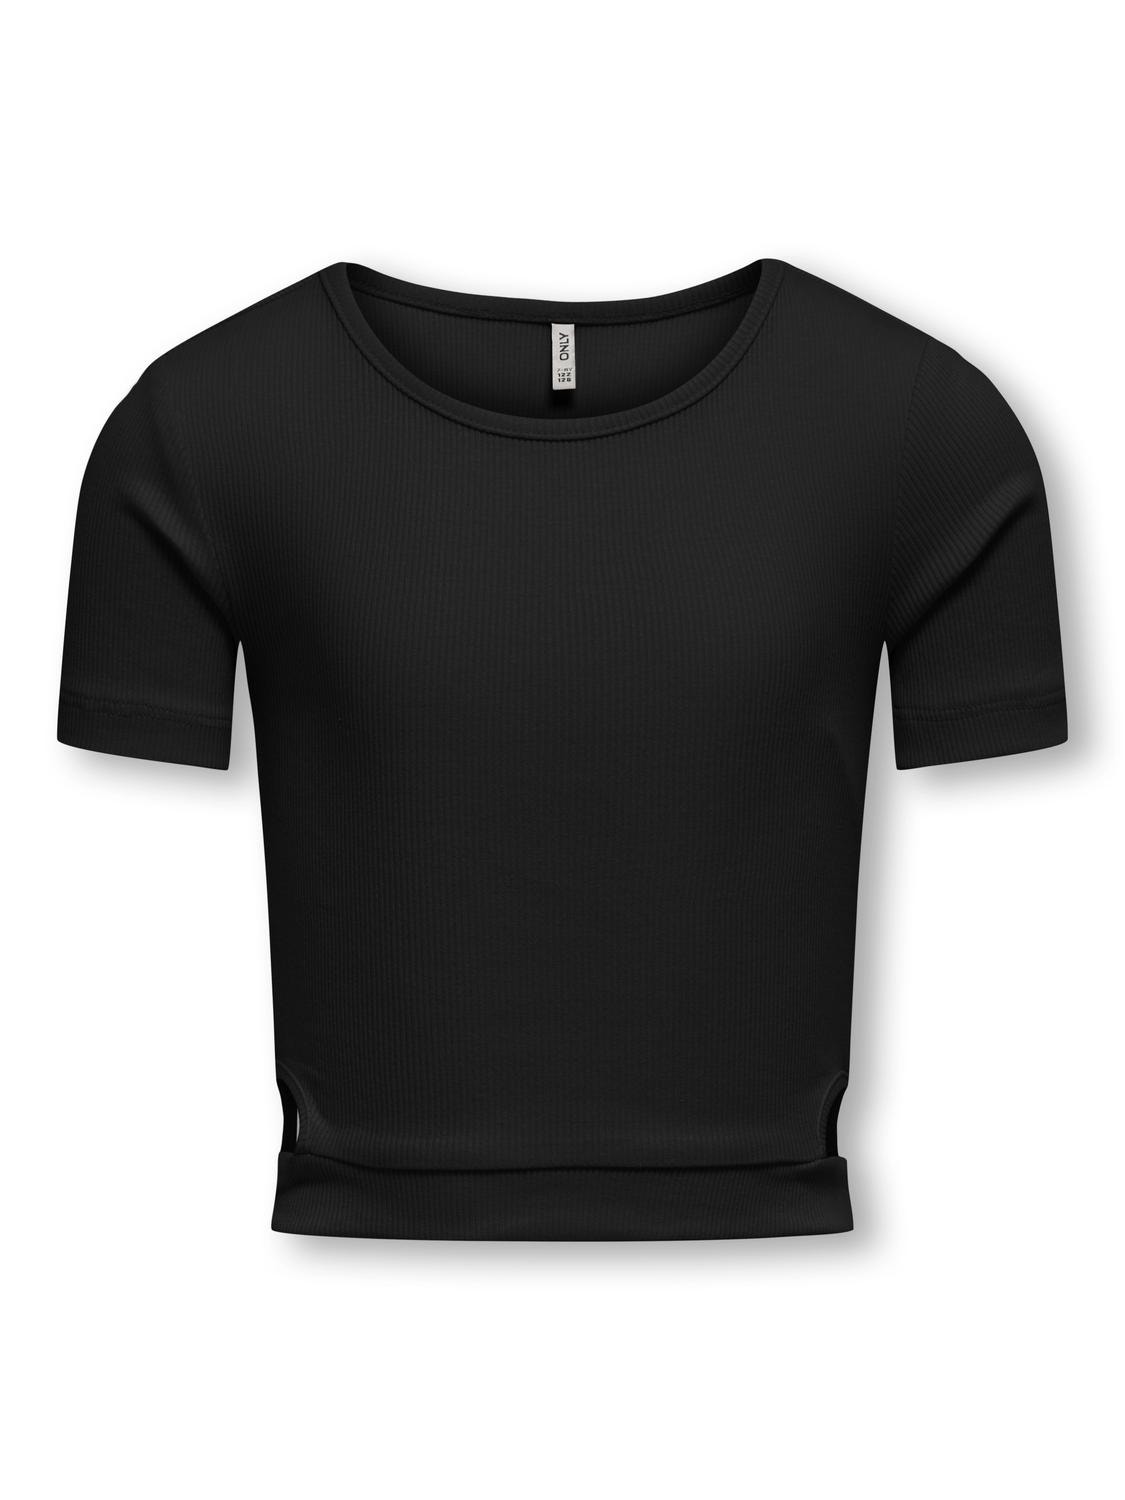 ONLY Tight Fit Round Neck Top -Black - 15313690